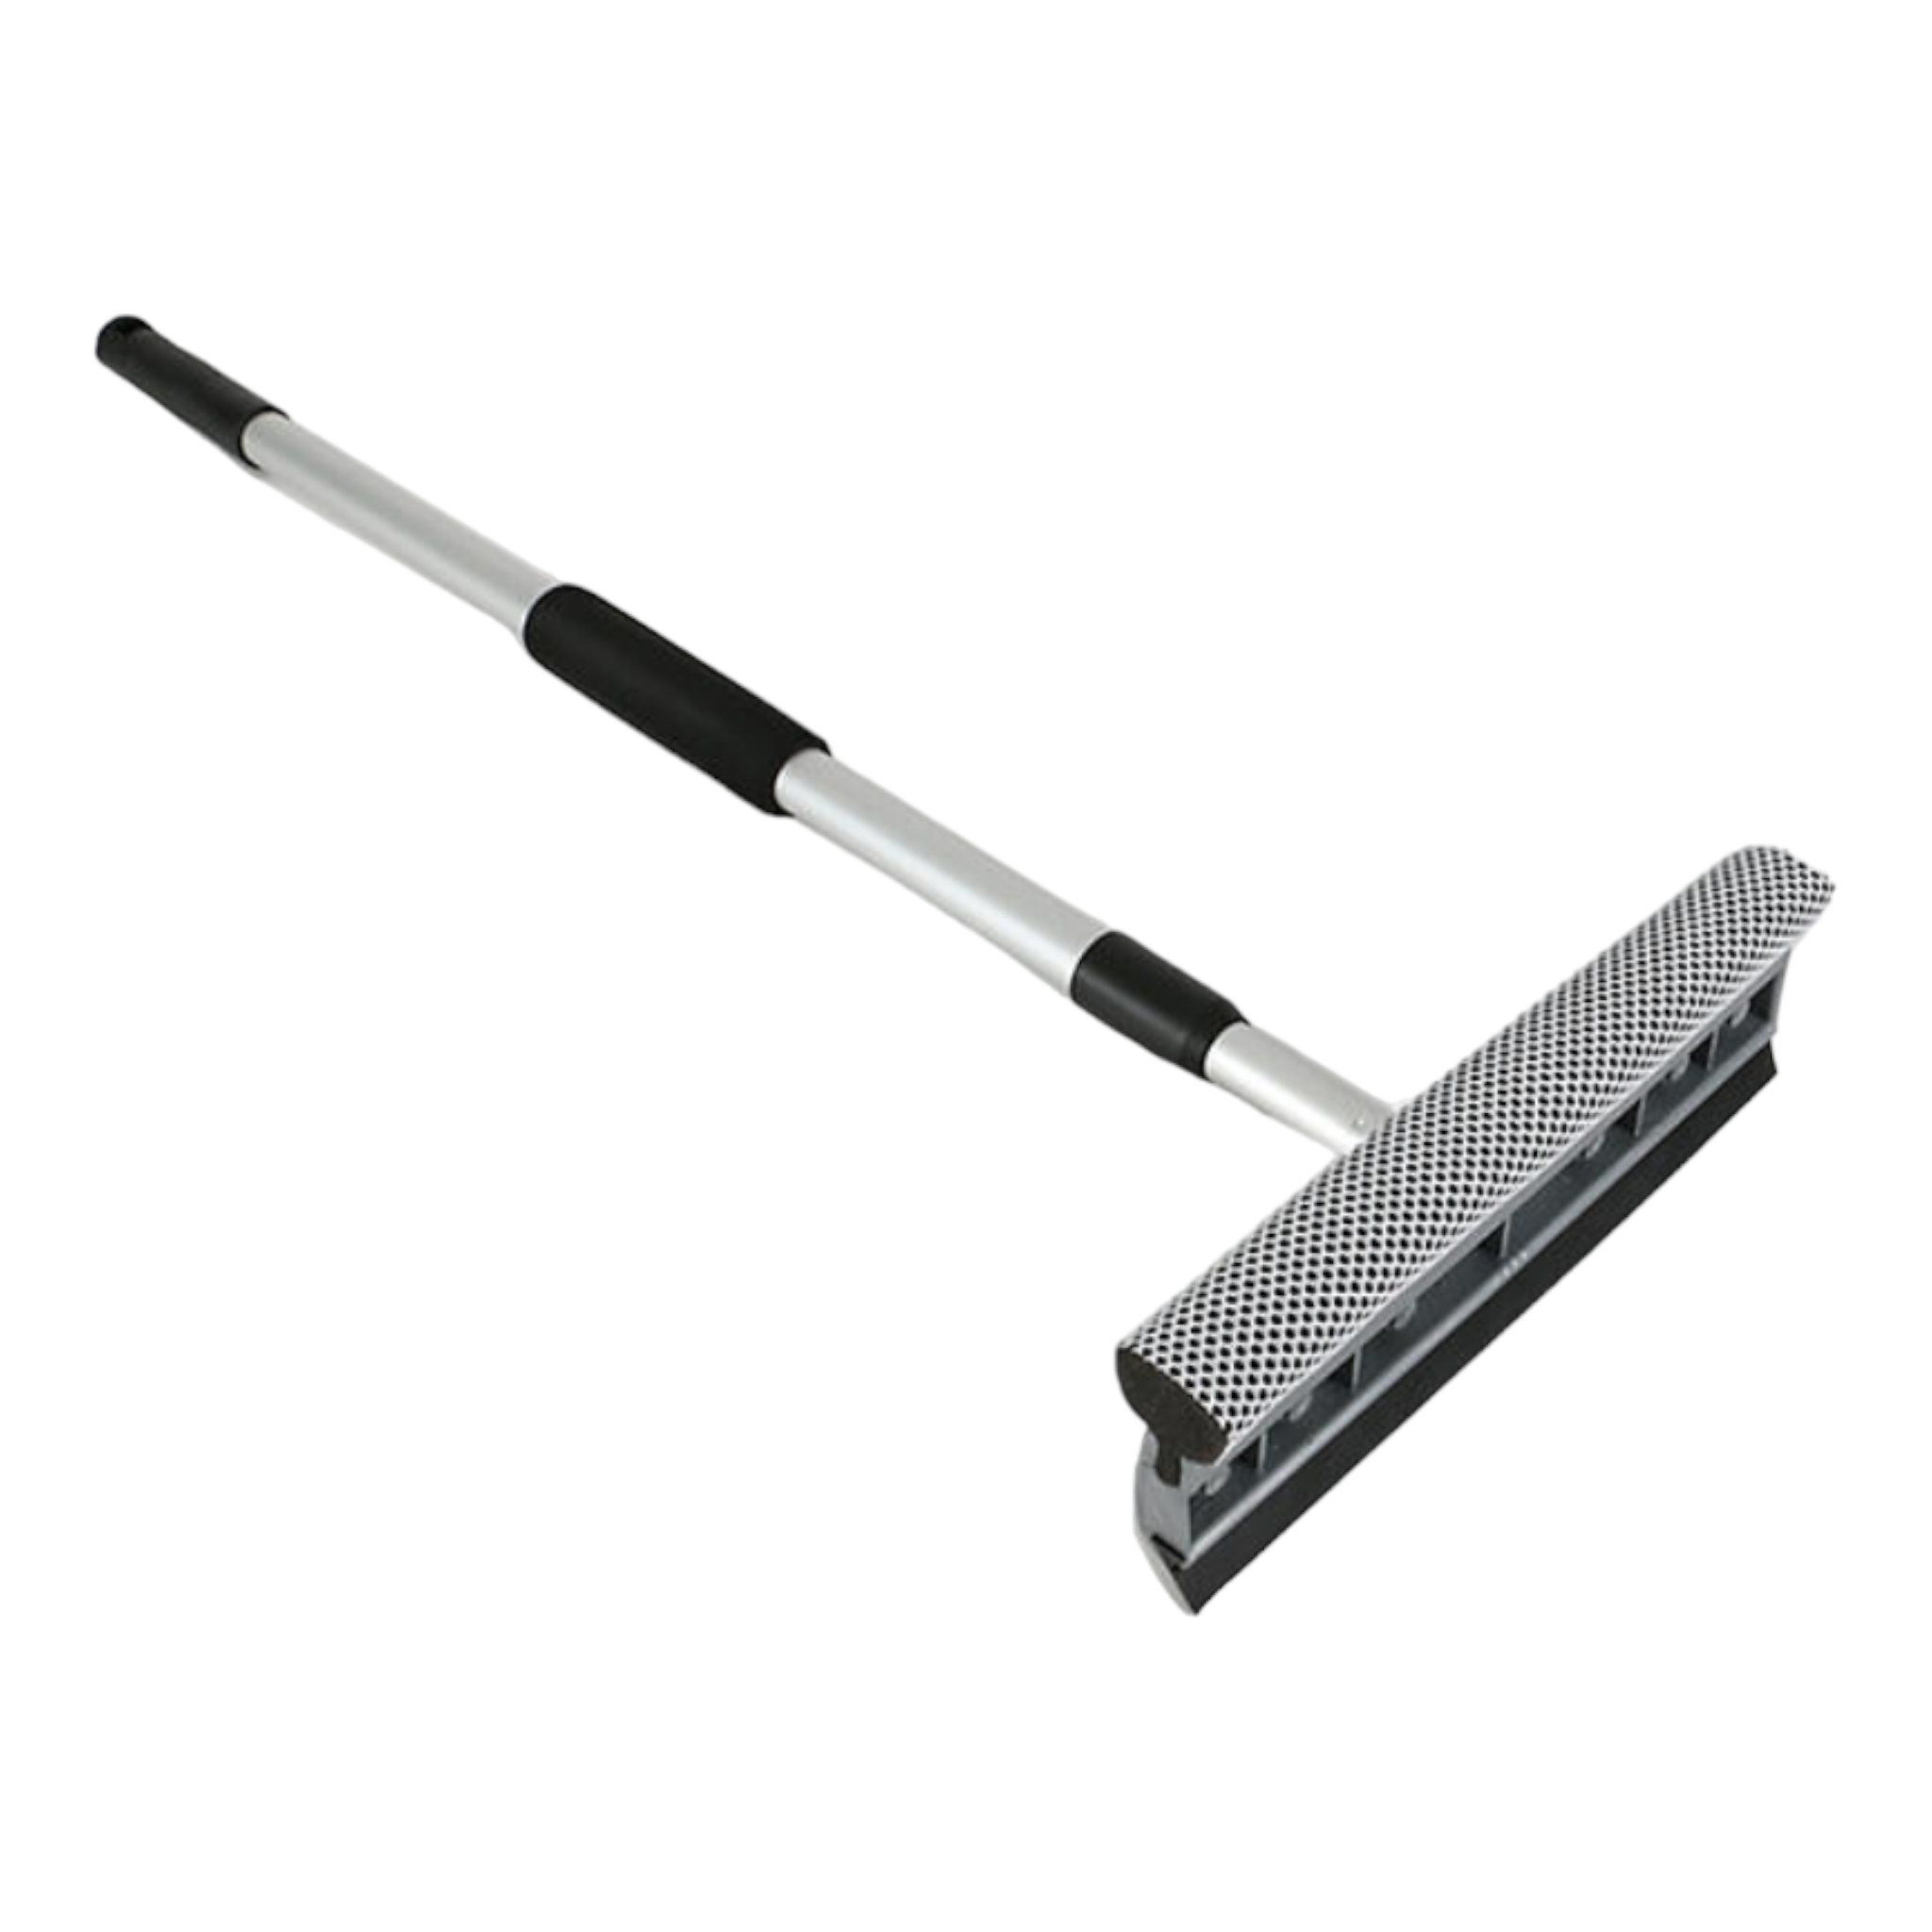 Addis Window Squeegee 2 in 1 Long Handle 1202Y